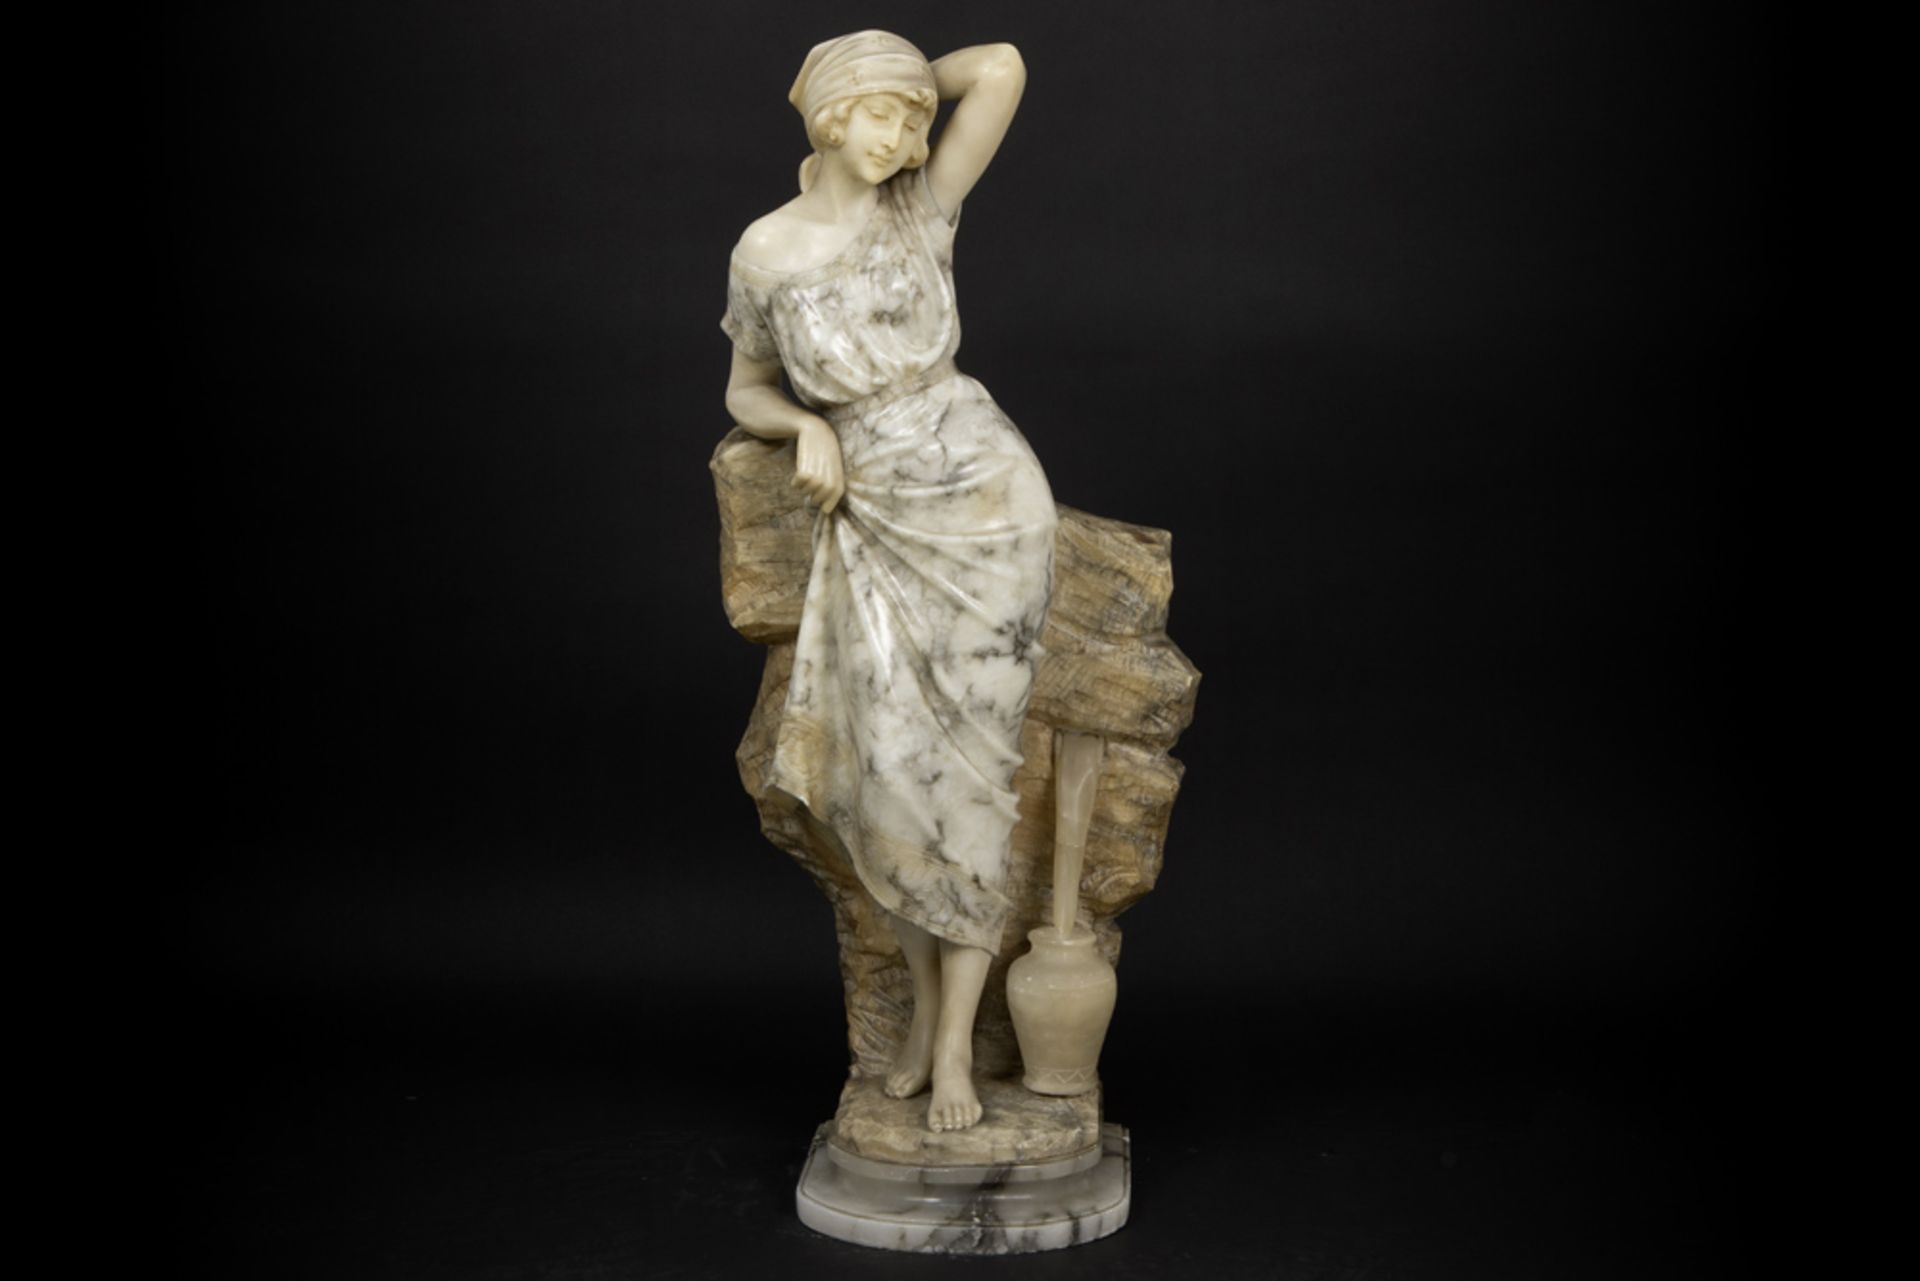 19th Cent. Italian sculpture in marble and alabaster - signed Trafely & Sardelli || TRAFELY &